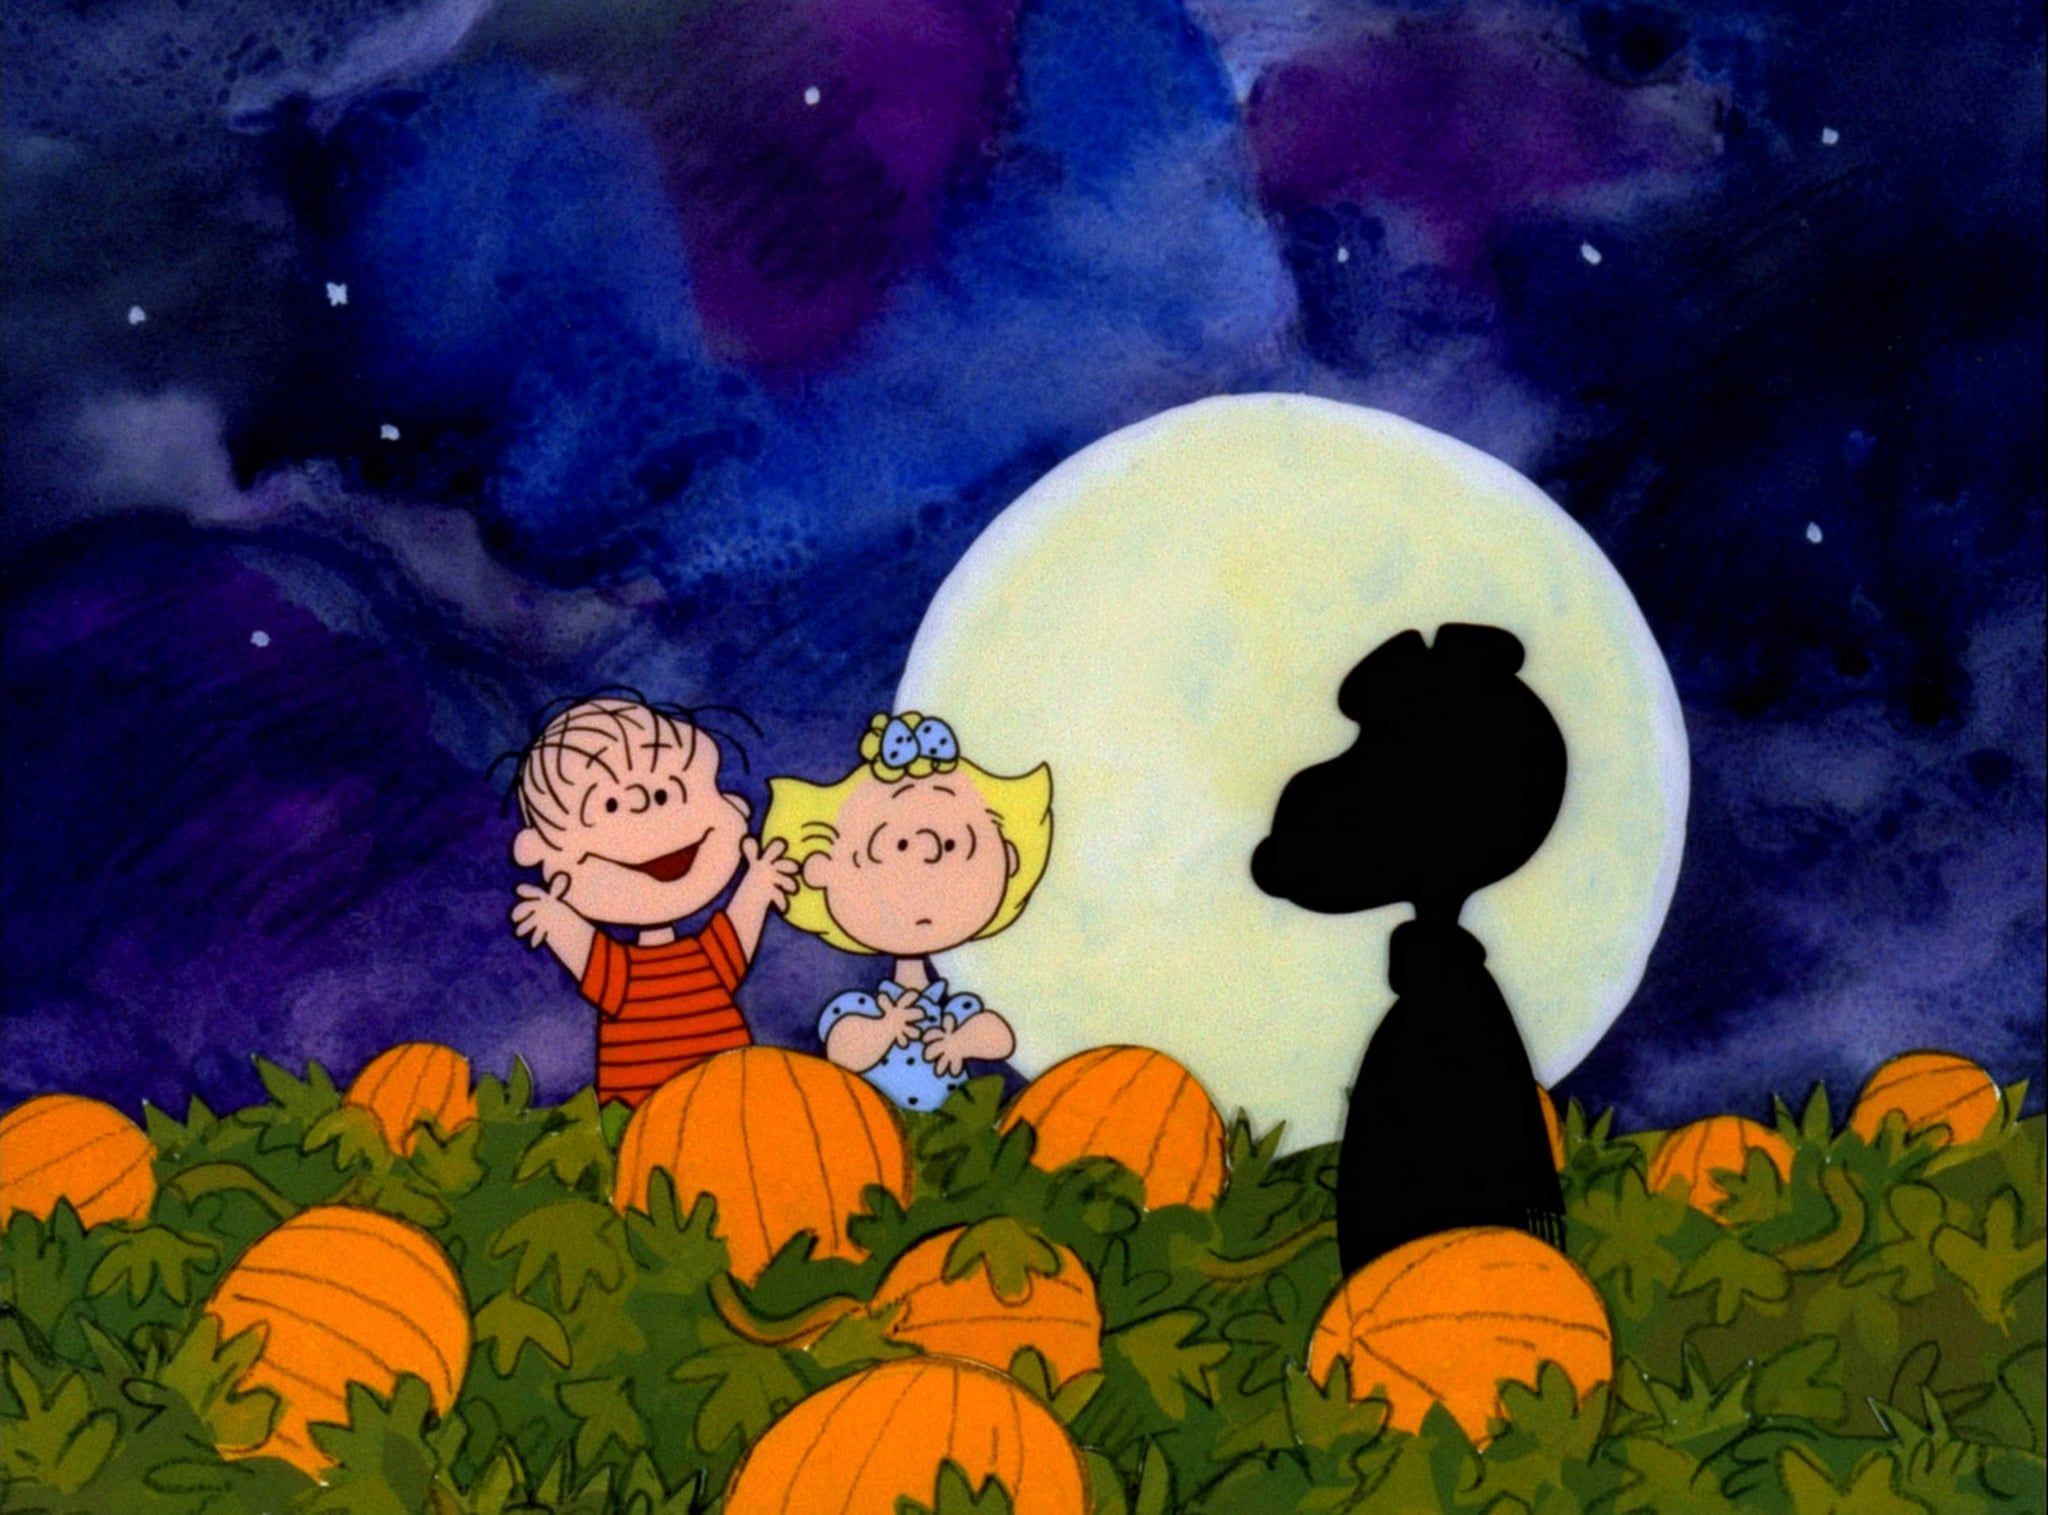 Charlie Brown and Sally Brown sit on a pumpkin in a pumpkin patch. - Charlie Brown